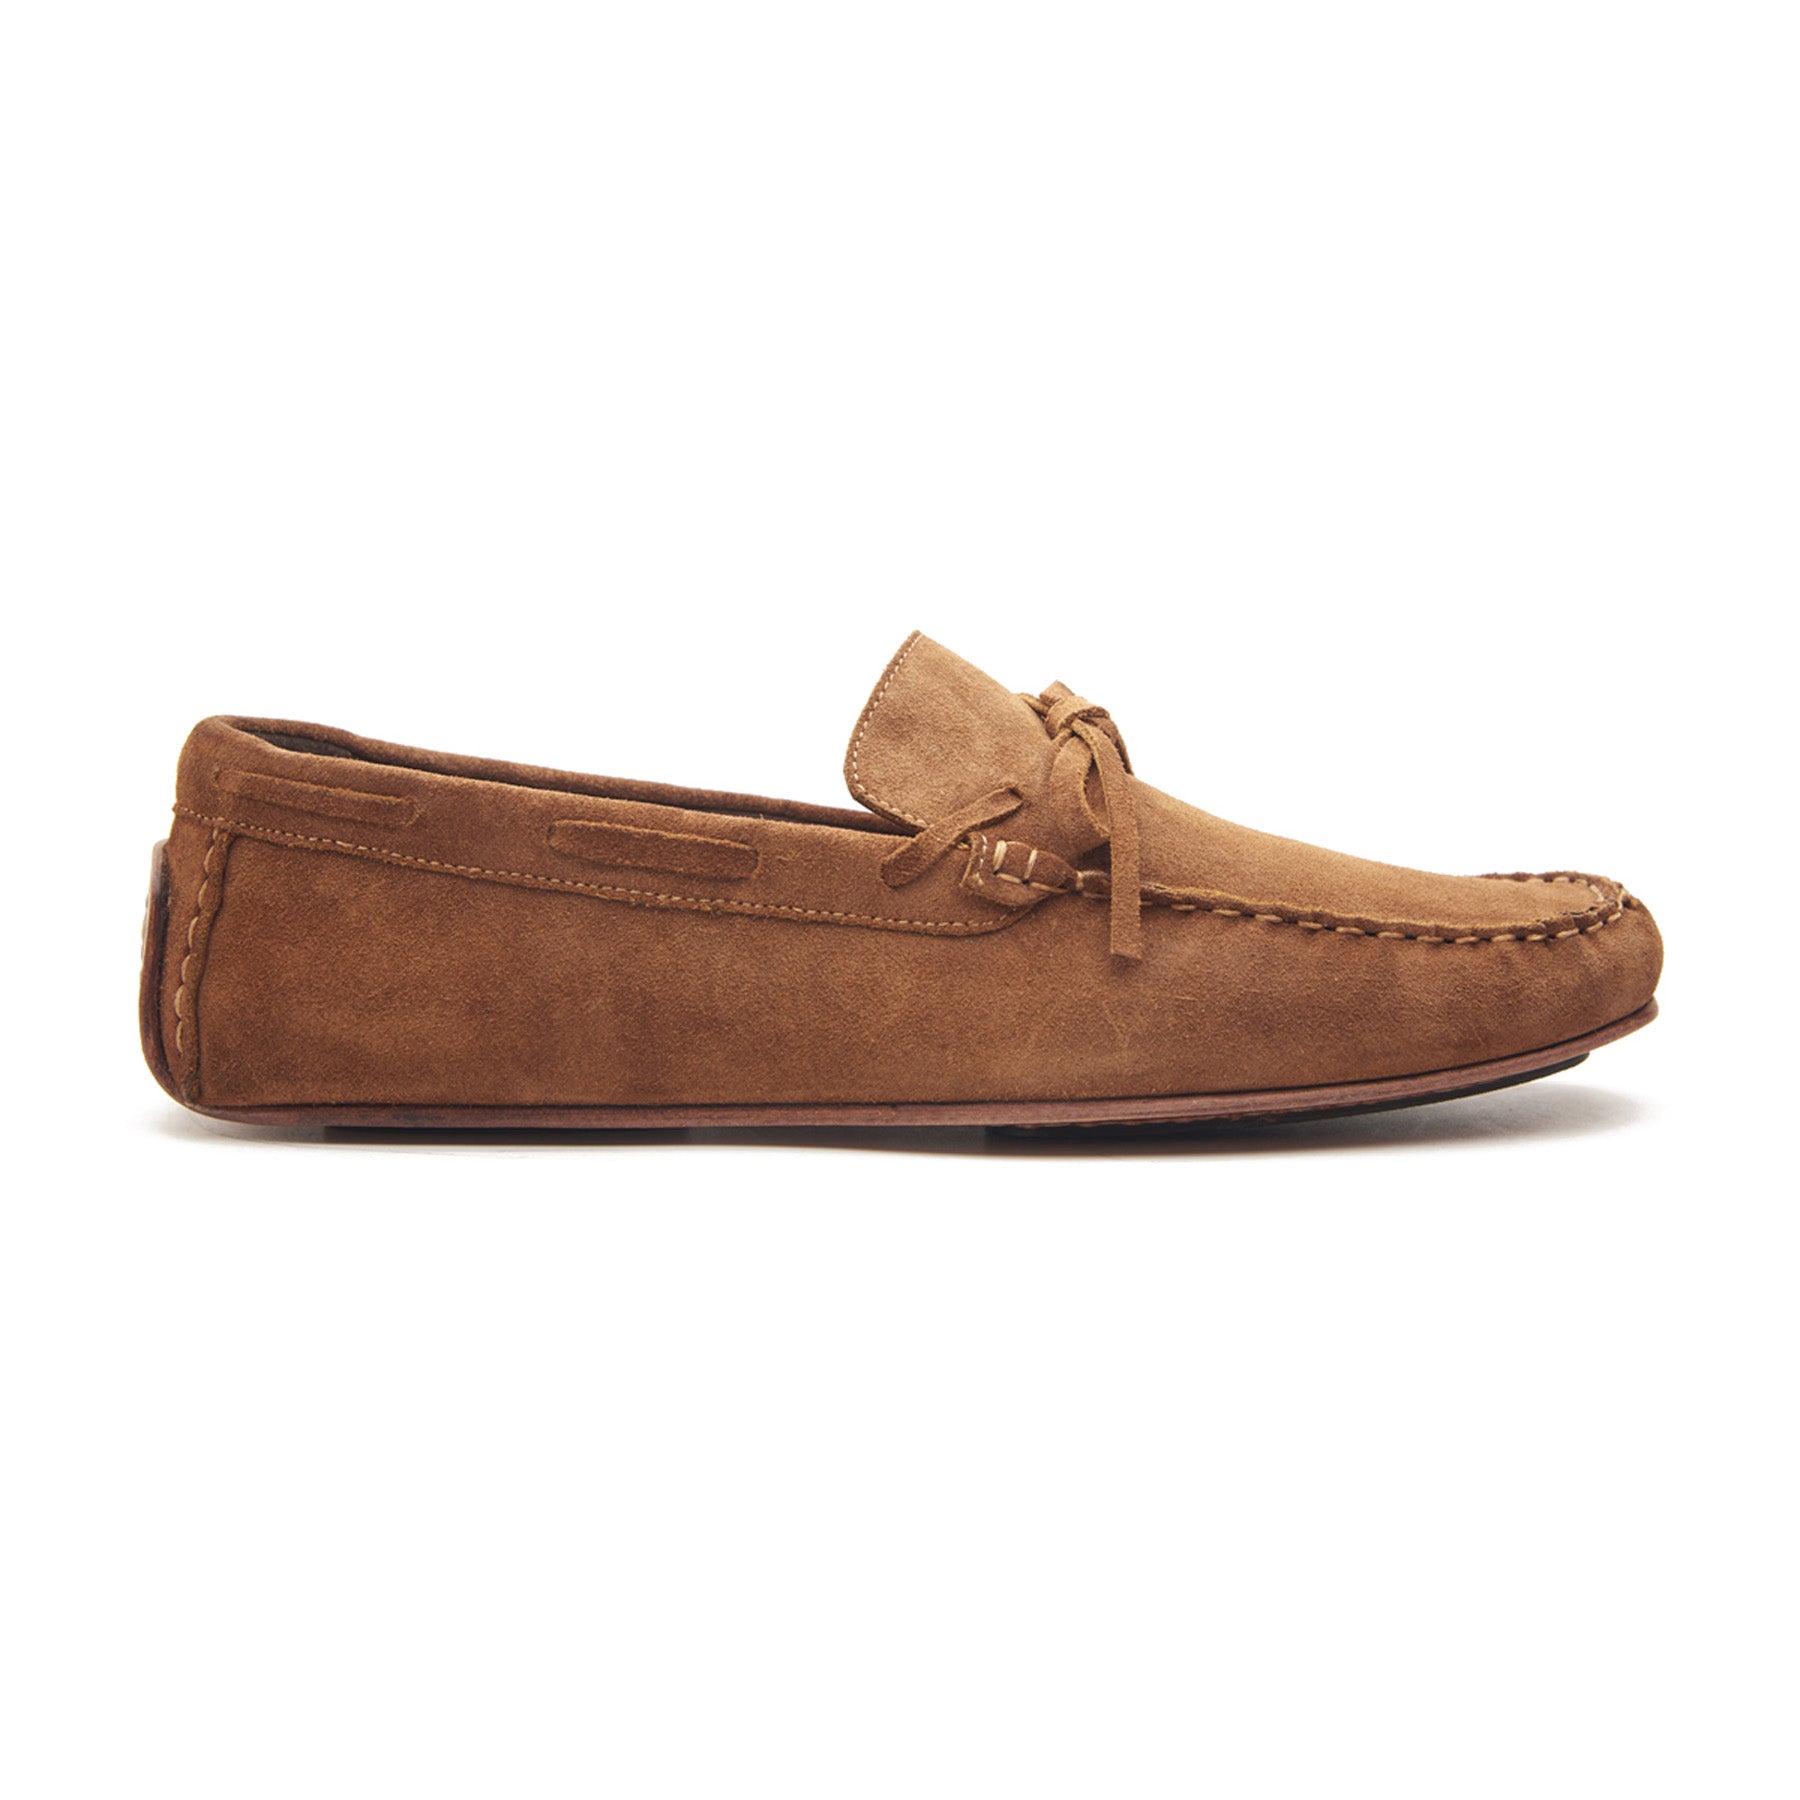 Edsel, Driving Shoes - Tan | Blake Stitched | Summer Classics – BLKBRD SHOEMAKER | HAND WELTED SHOES, HANDCRAFTED IN INDIA